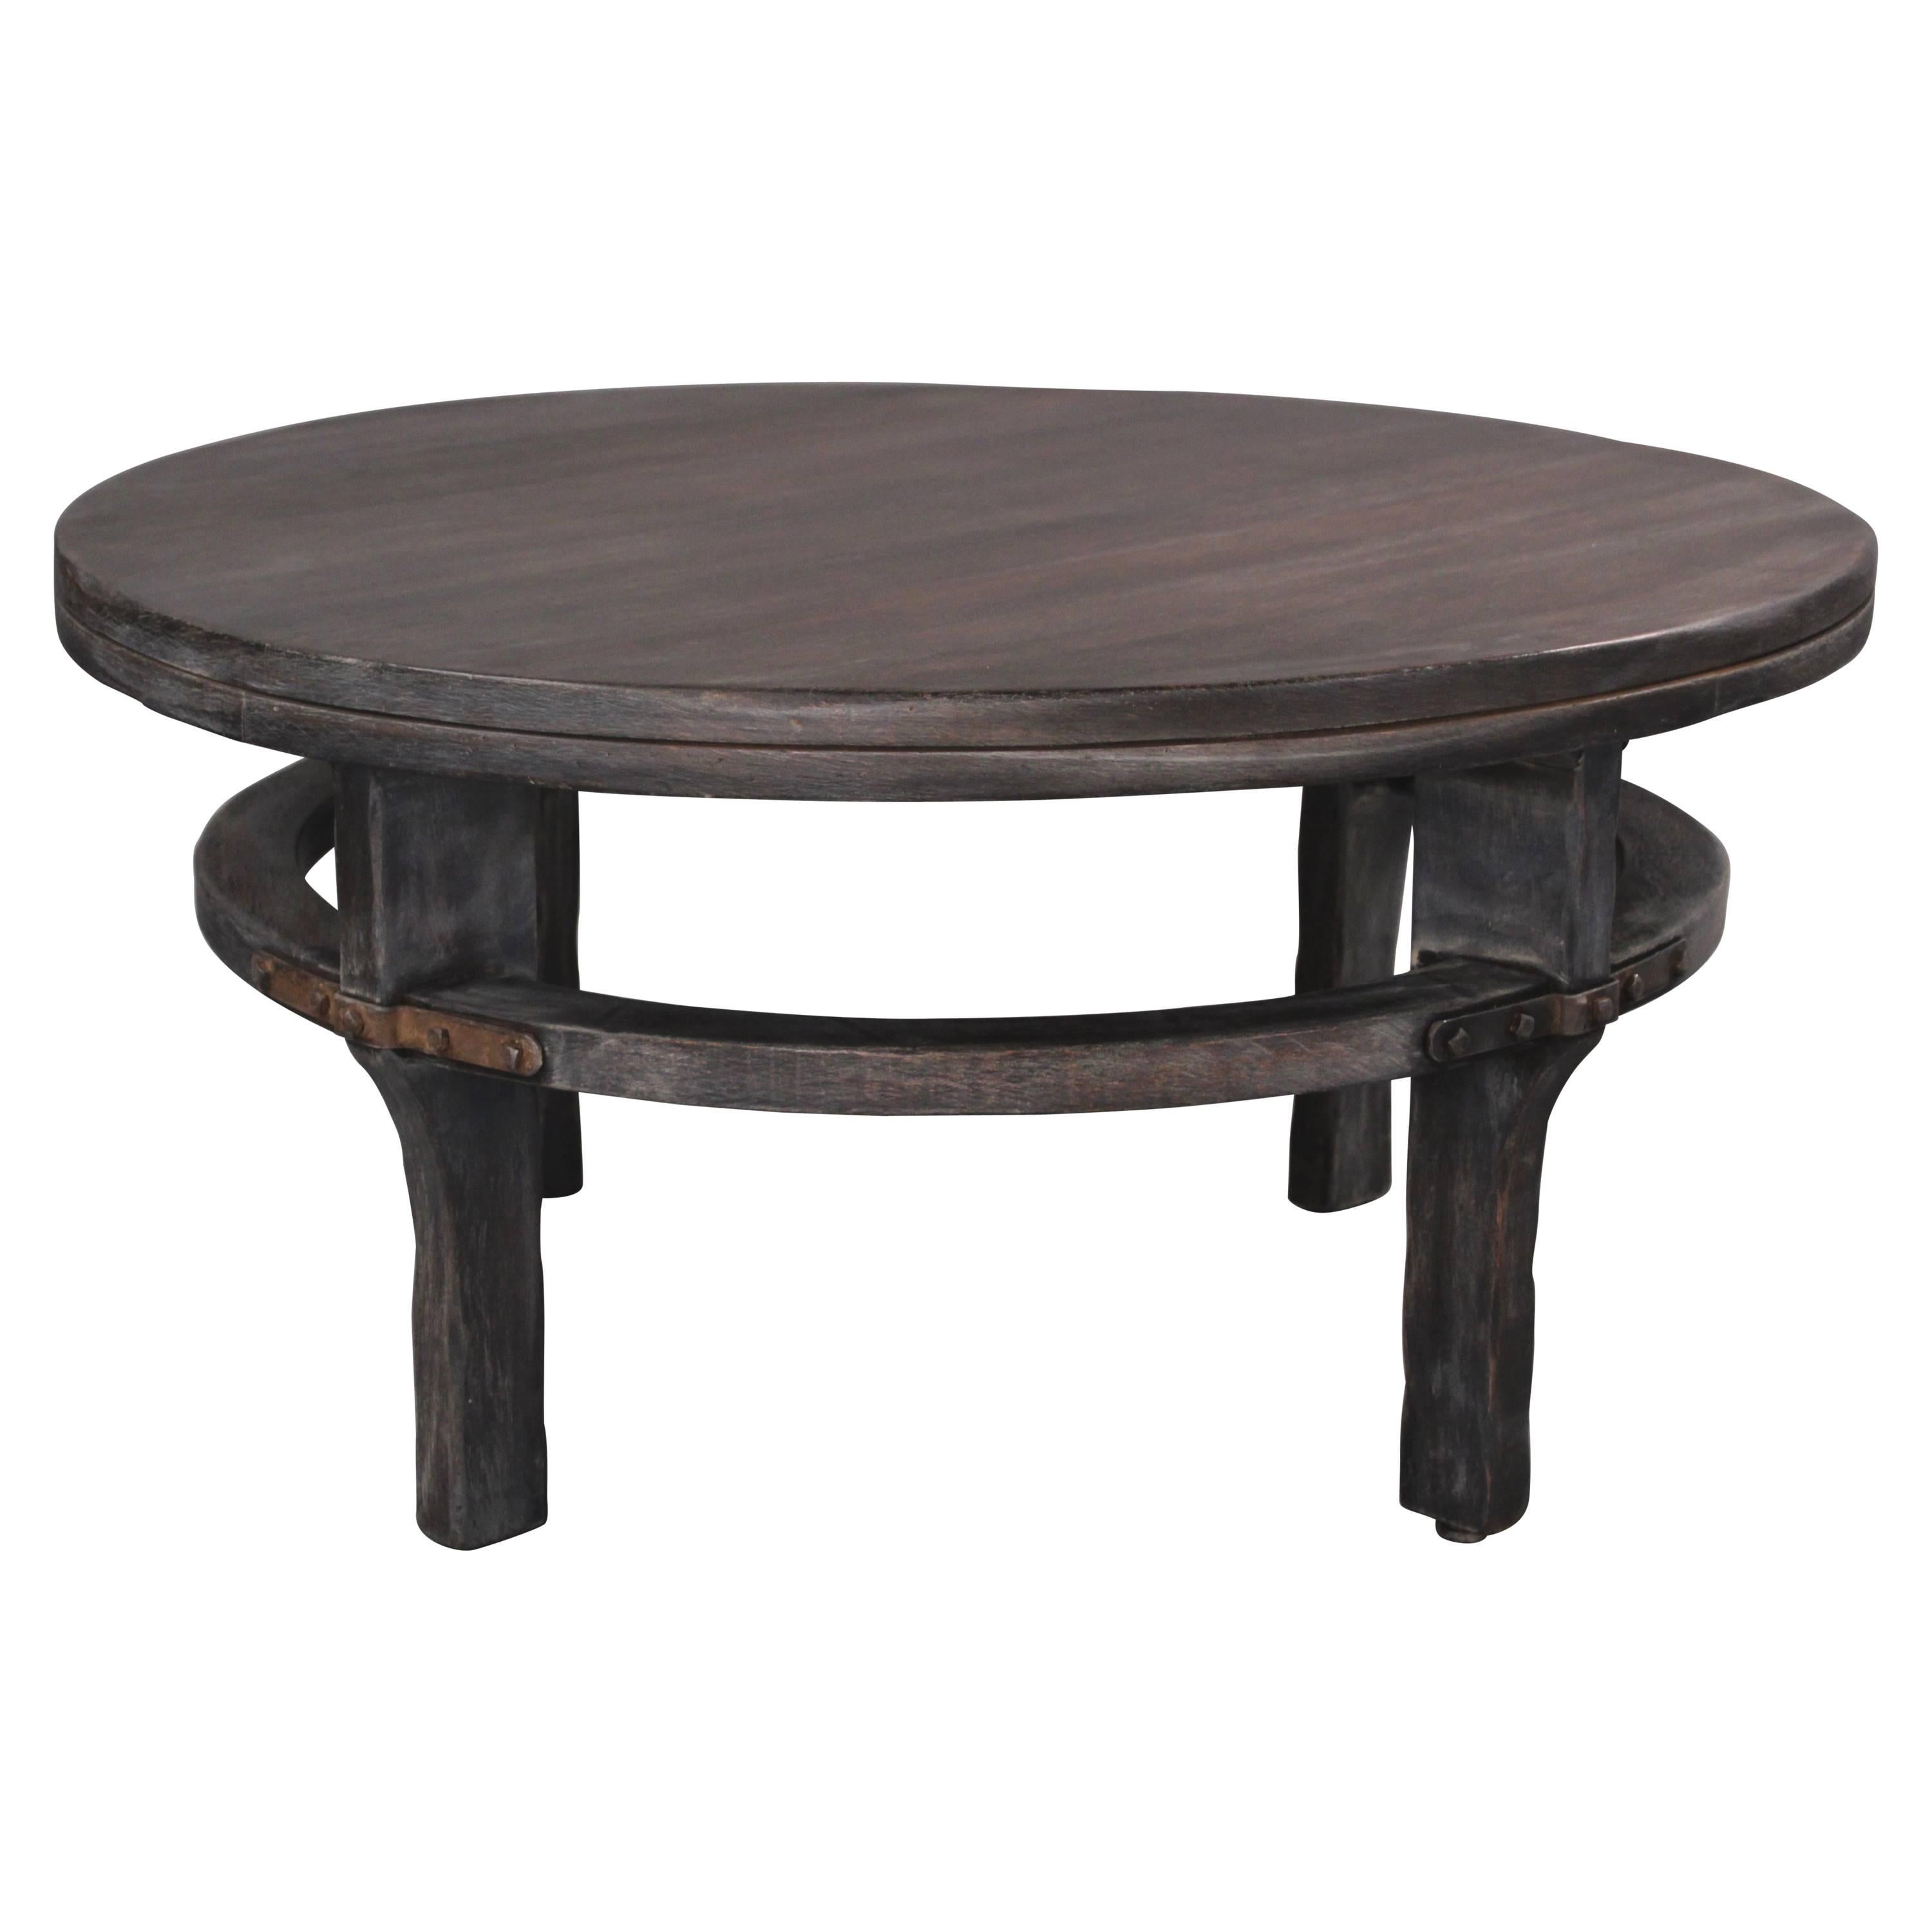 1930s Round Monterey Coffee Table with Old Wood Finish